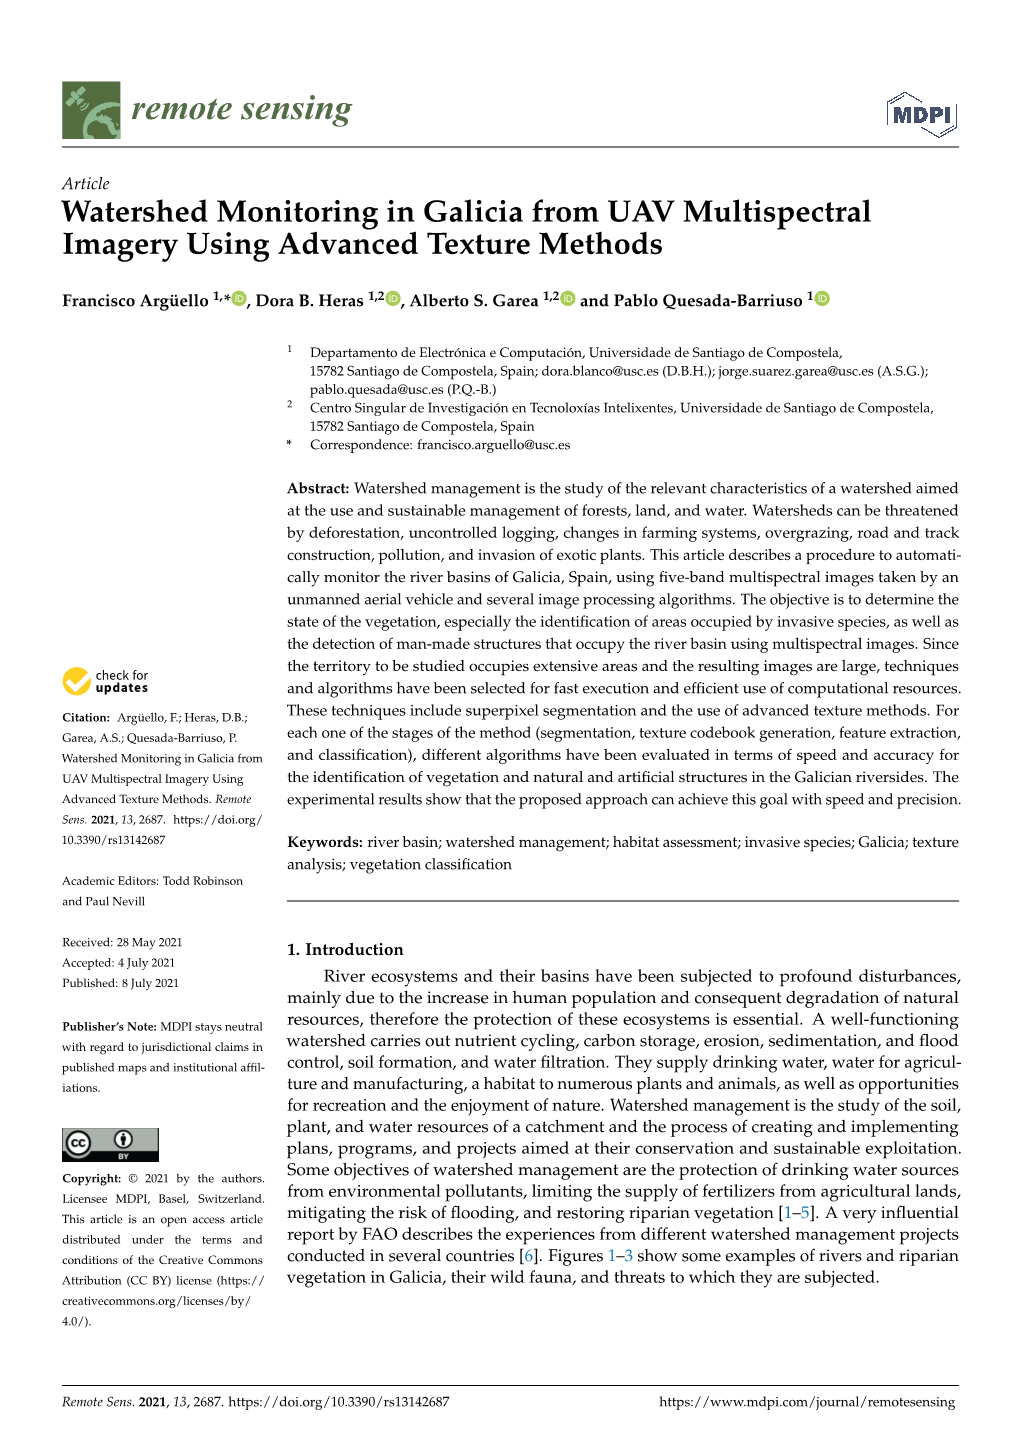 Watershed Monitoring in Galicia from UAV Multispectral Imagery Using Advanced Texture Methods